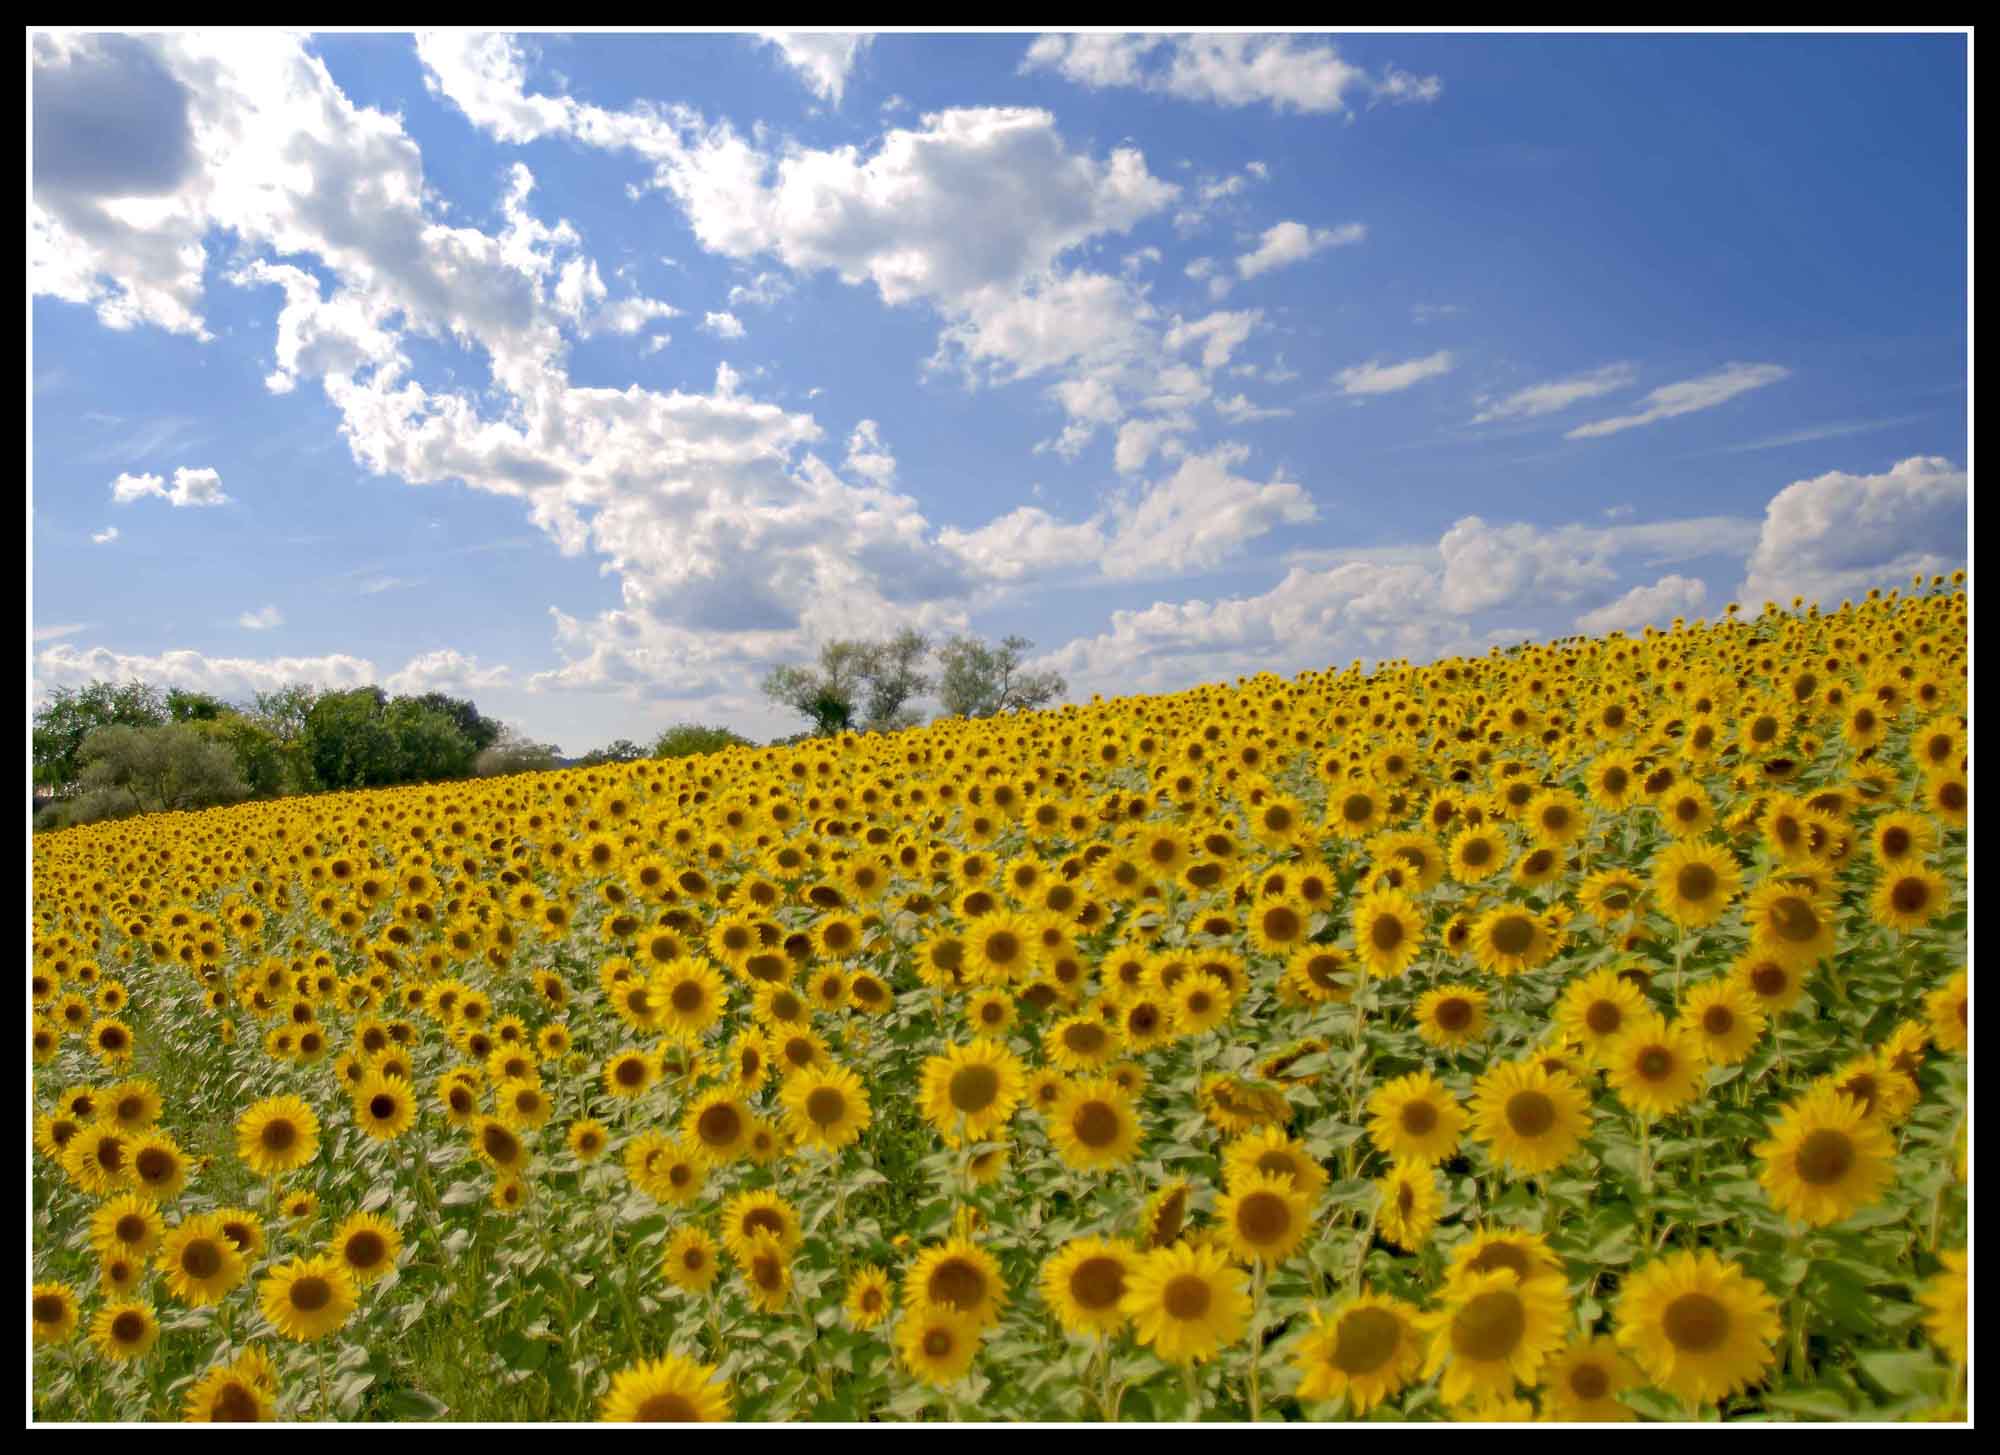 Field Of Sunflowers (user submitted)